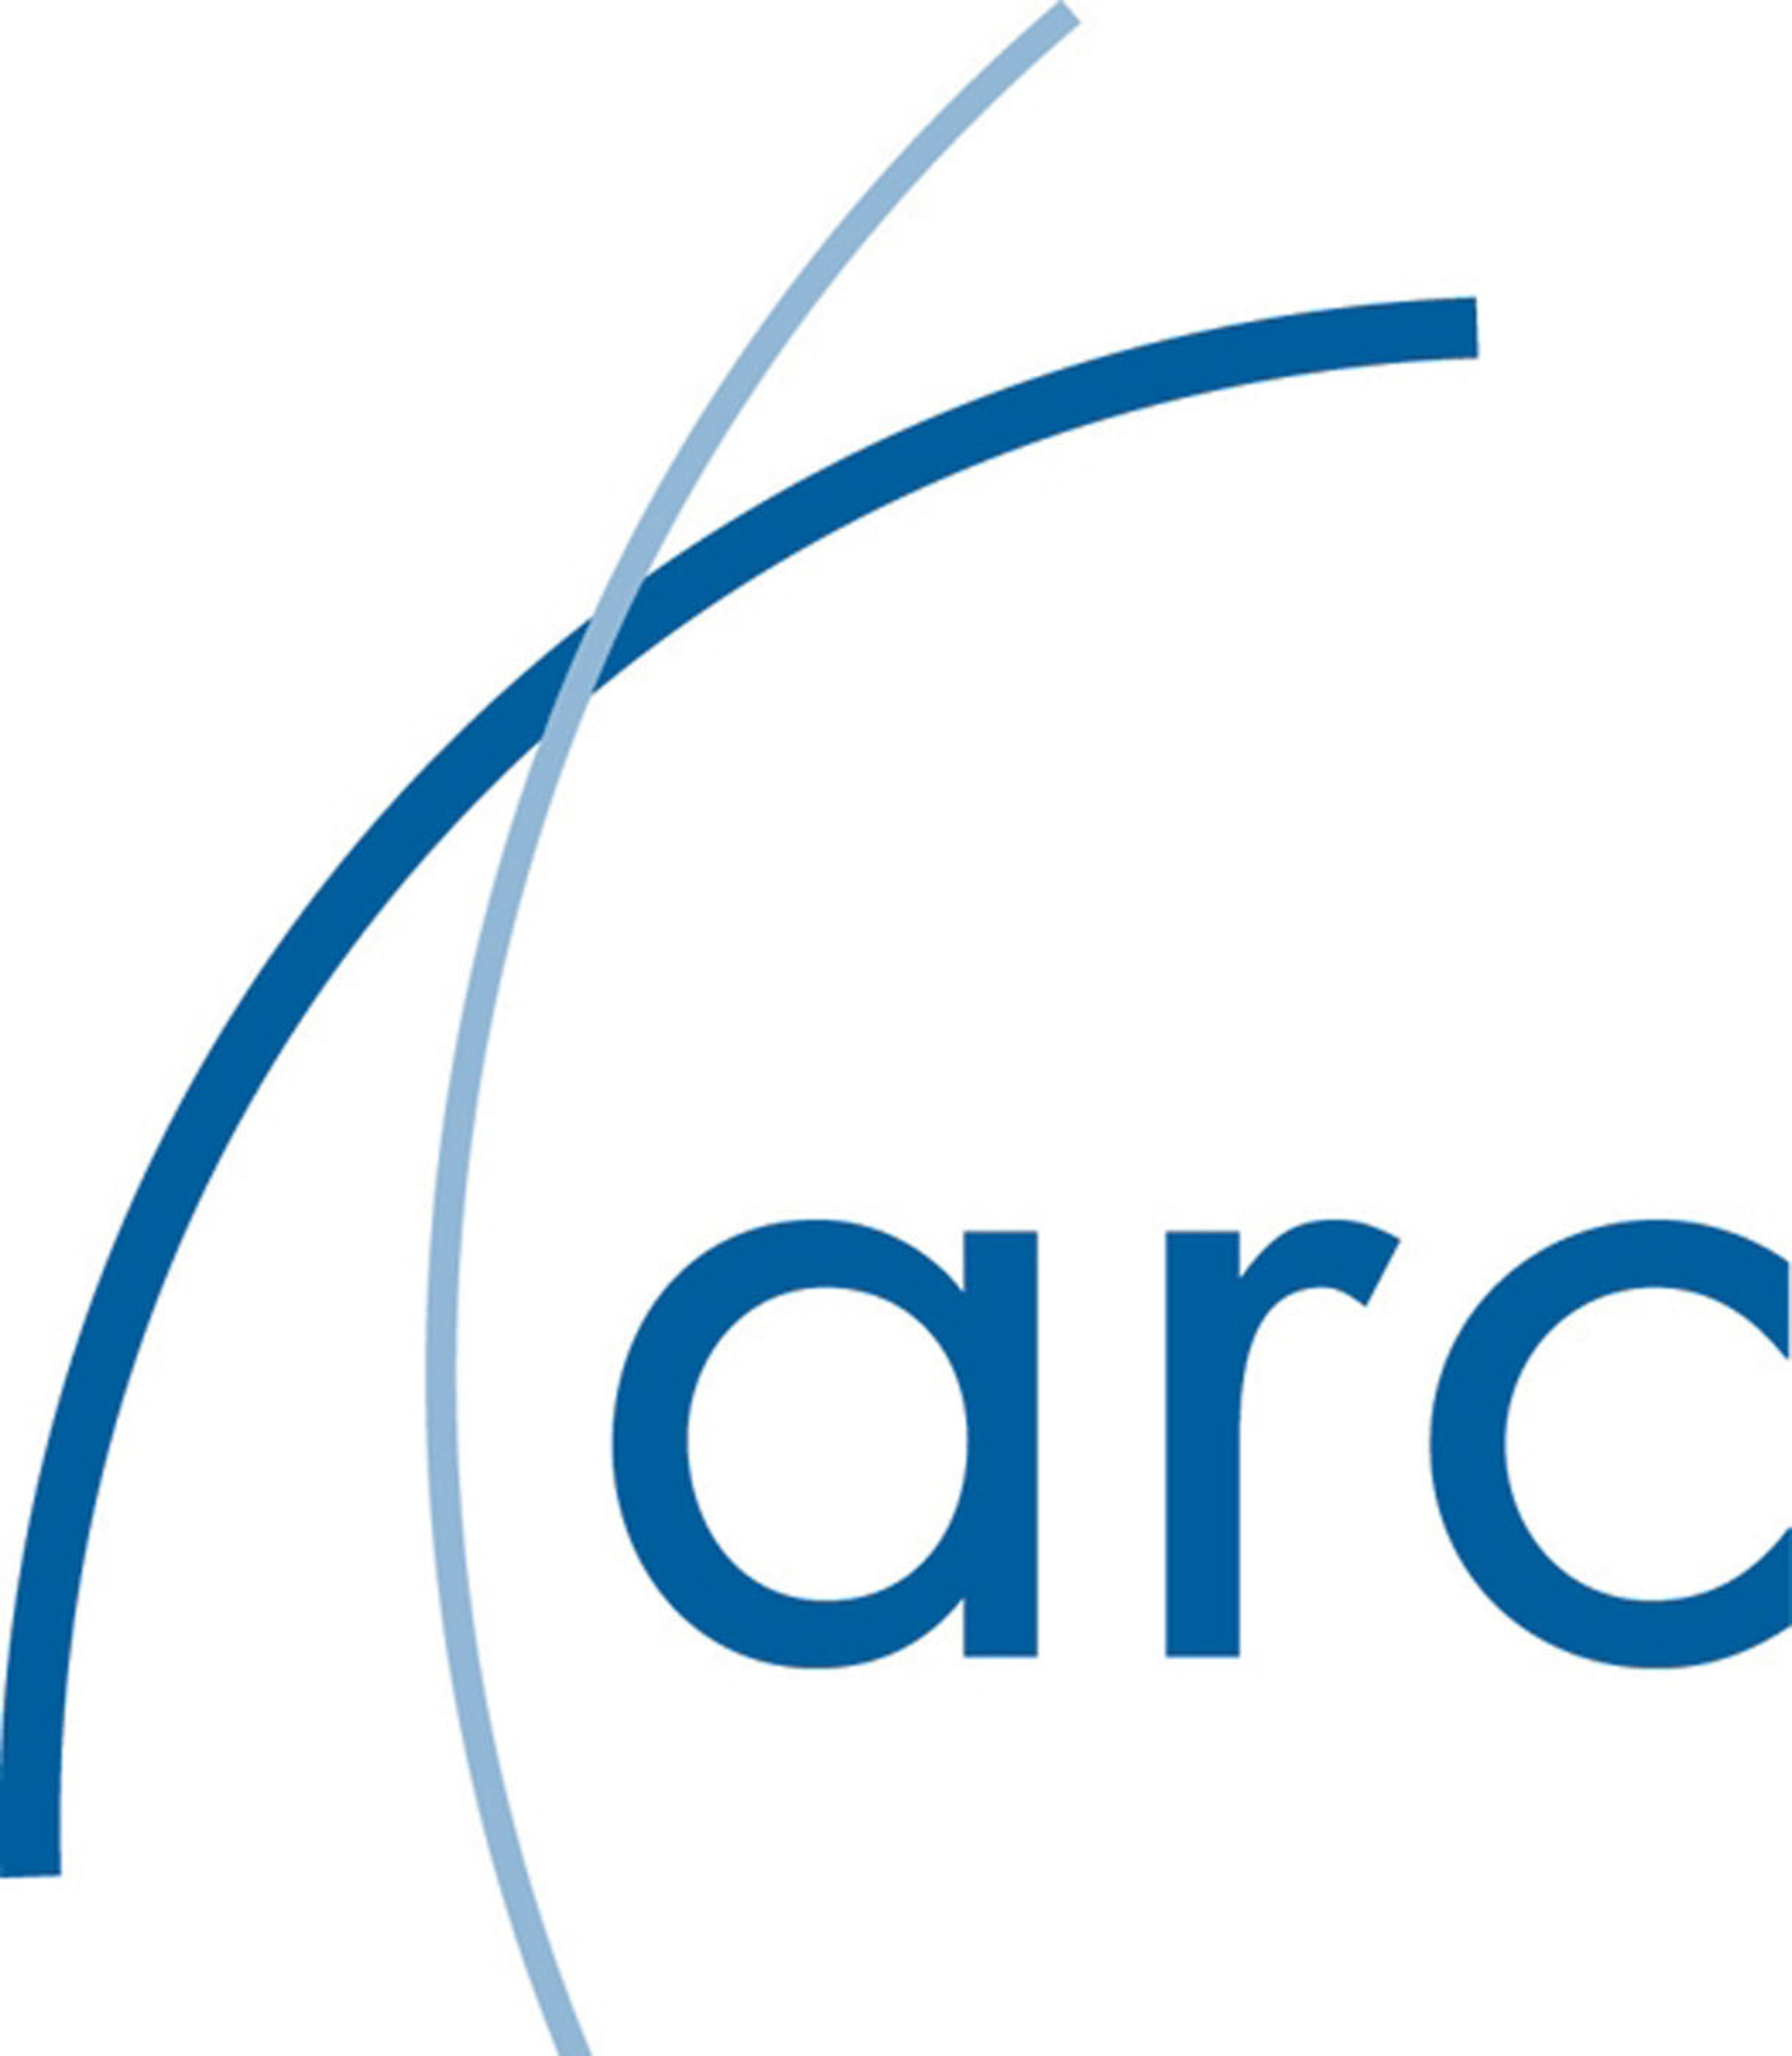 As the financial backbone of the U.S. travel industry, ARC enables commerce among travel agencies, airlines, and travel suppliers, and offers them secure and accurate financial settlement services. About 16,000 travel agencies and 190 airlines make up the ARC network. In 2011, ARC settled more than $82 billion worth of transactions between travel sellers and airlines. ARC also supplies transactional data to organizations, facilitating better business decisions through fact-based market analyses. Established in 1984, ARC is headquartered in Arlington, Va. For more information, visit www.arccorp.com.